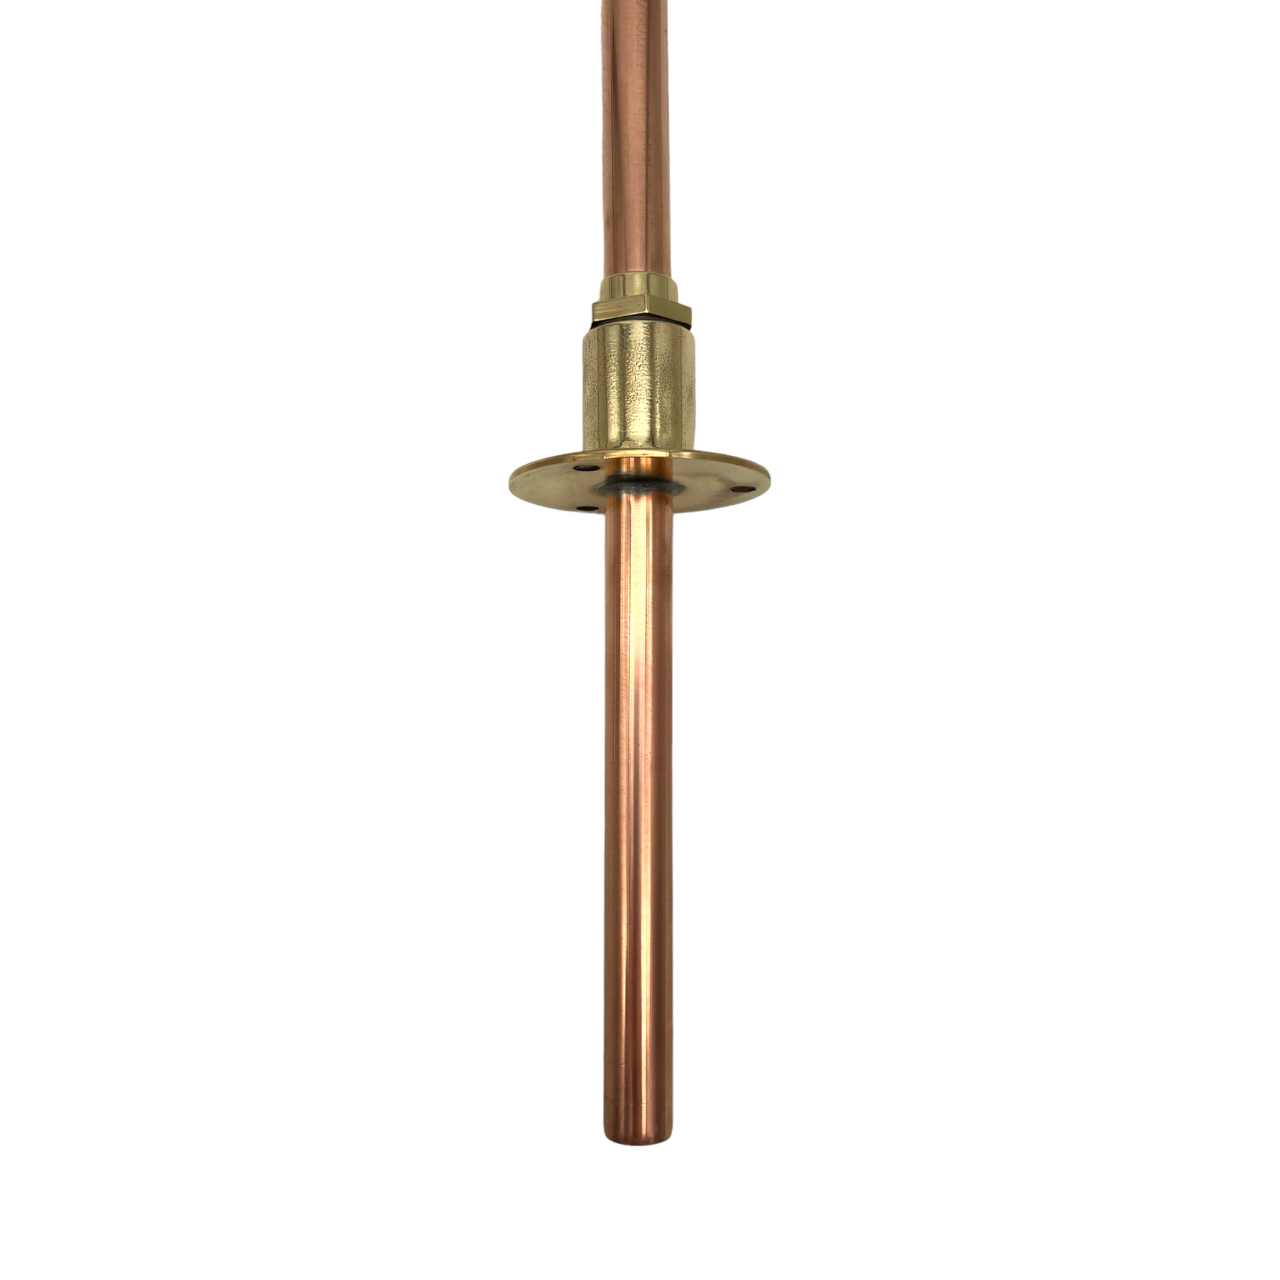 Vintage style brass and copper tap with 15mm tail ends  sold by All Things French Store